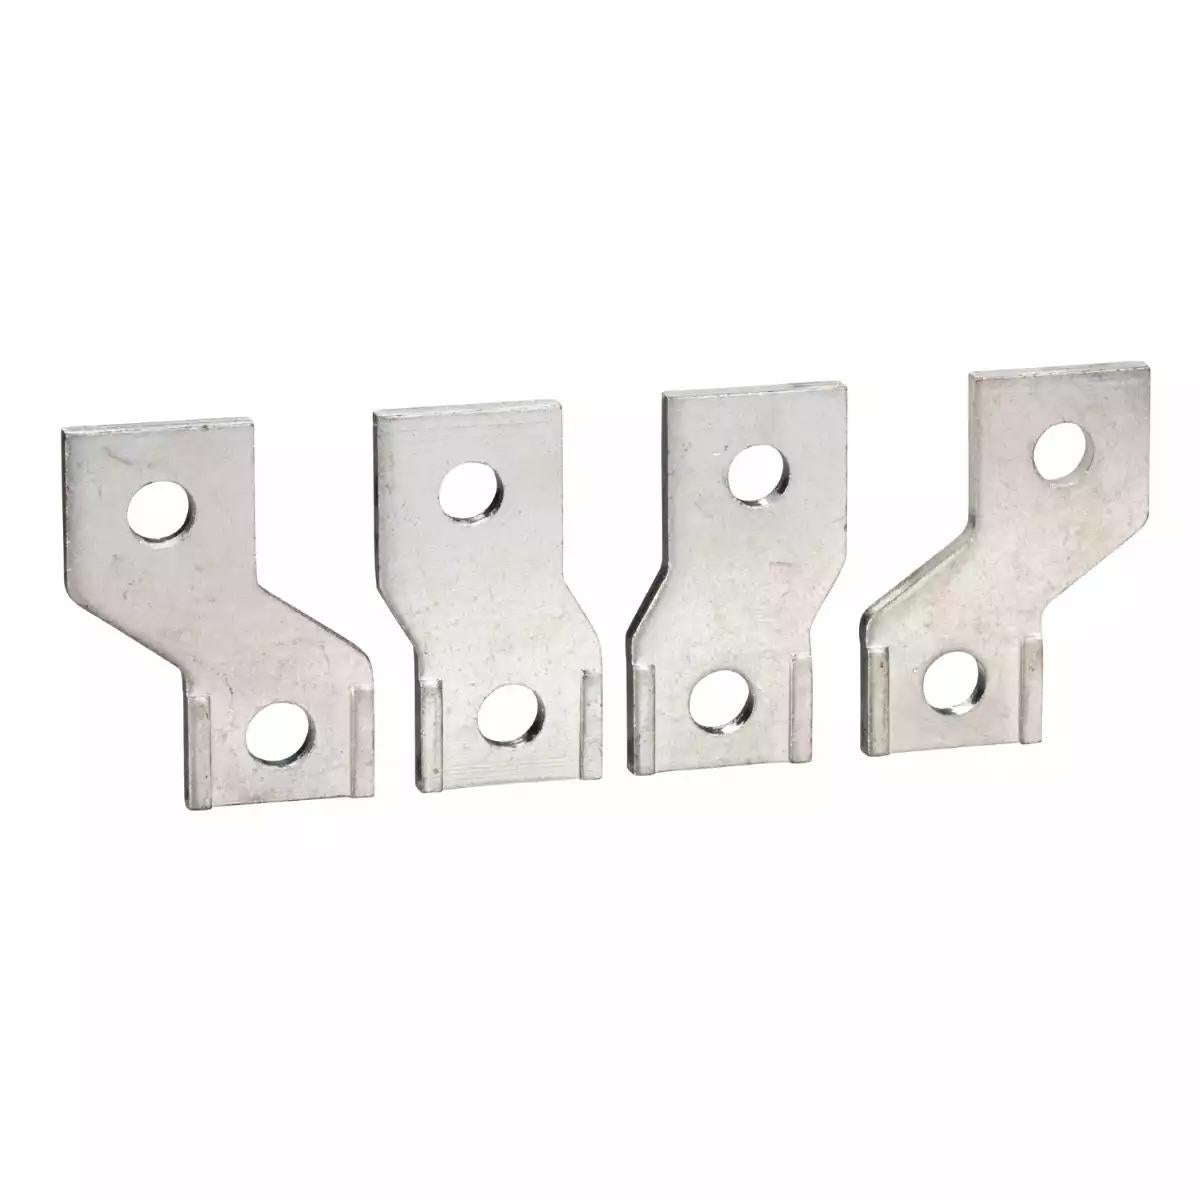 Schneider Electric Interpact INS/INV spreader set - 52.5 mm pitch - flat connection - 4 poles